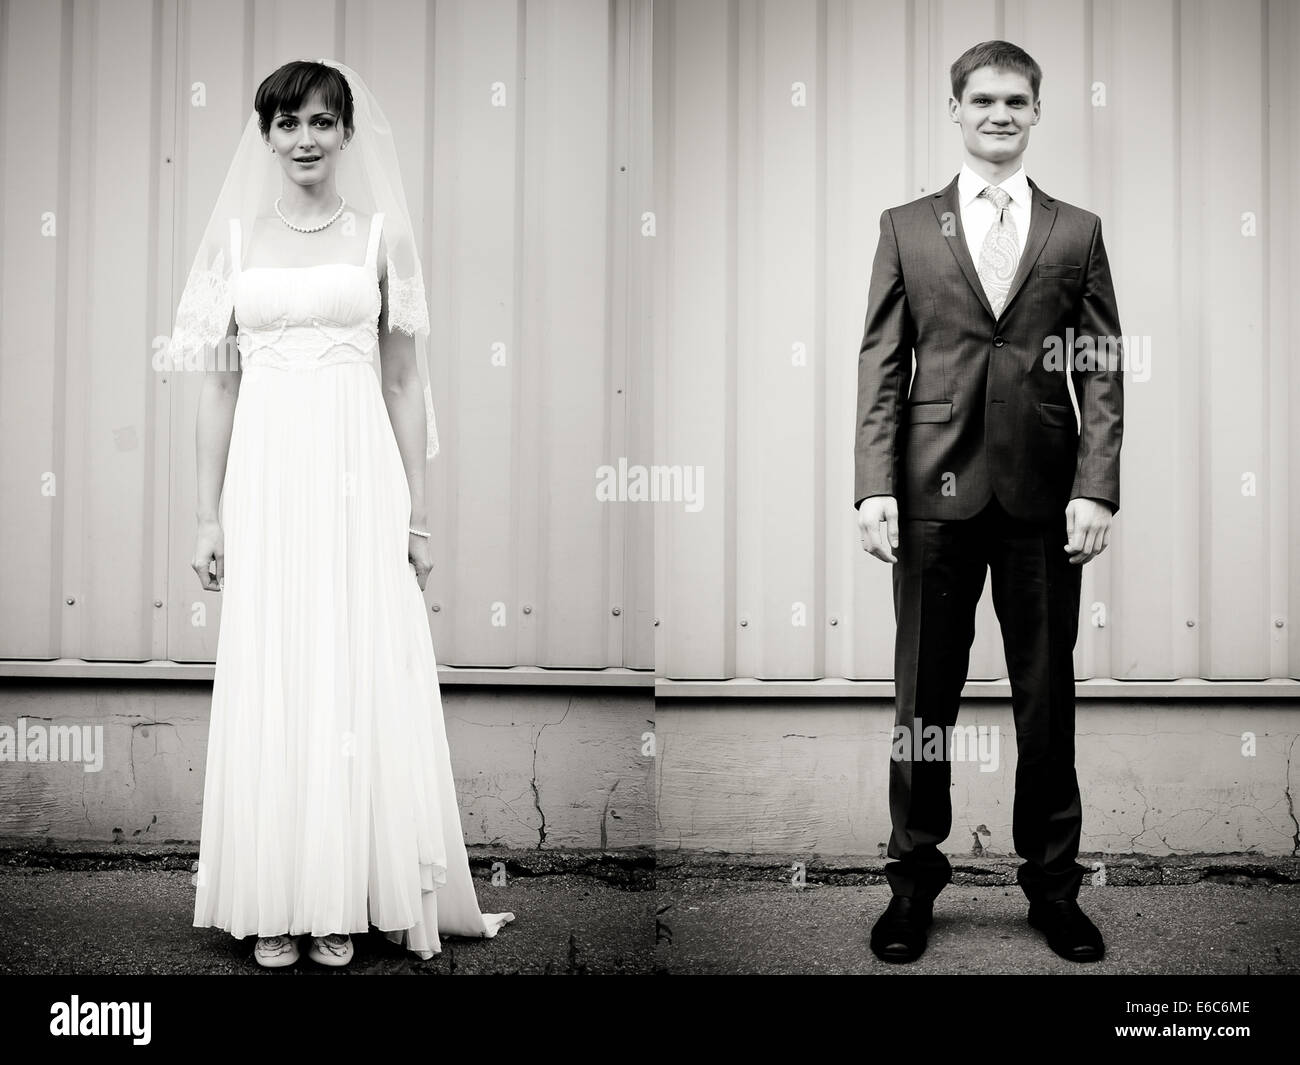 Full Length portrait of Bride and Groom standing against wall Banque D'Images